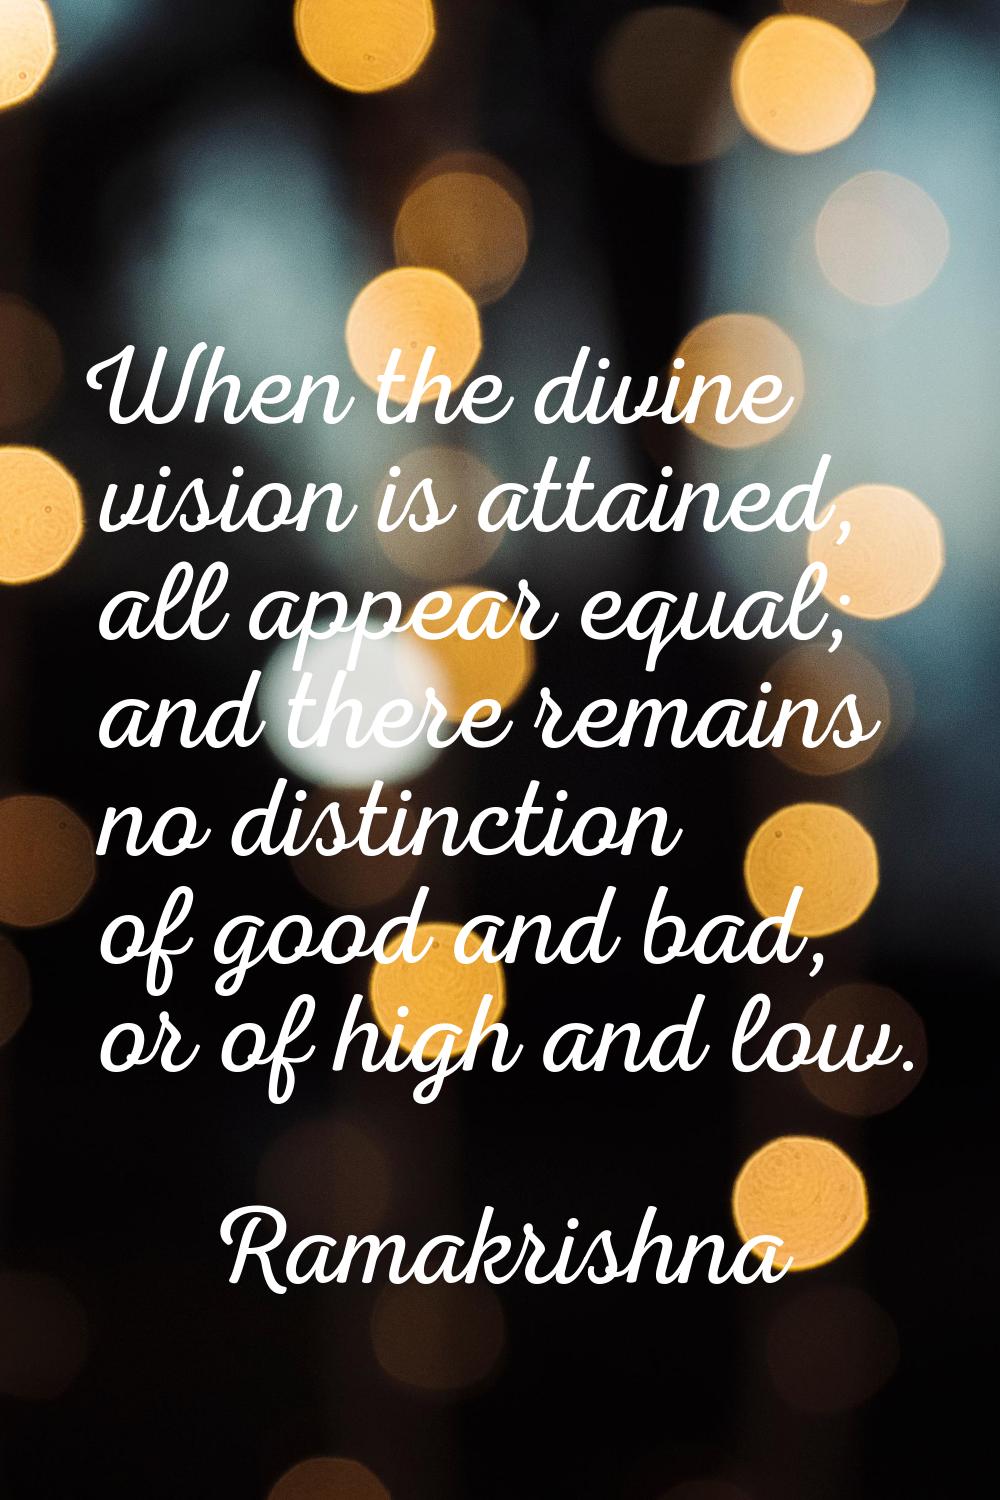 When the divine vision is attained, all appear equal; and there remains no distinction of good and 